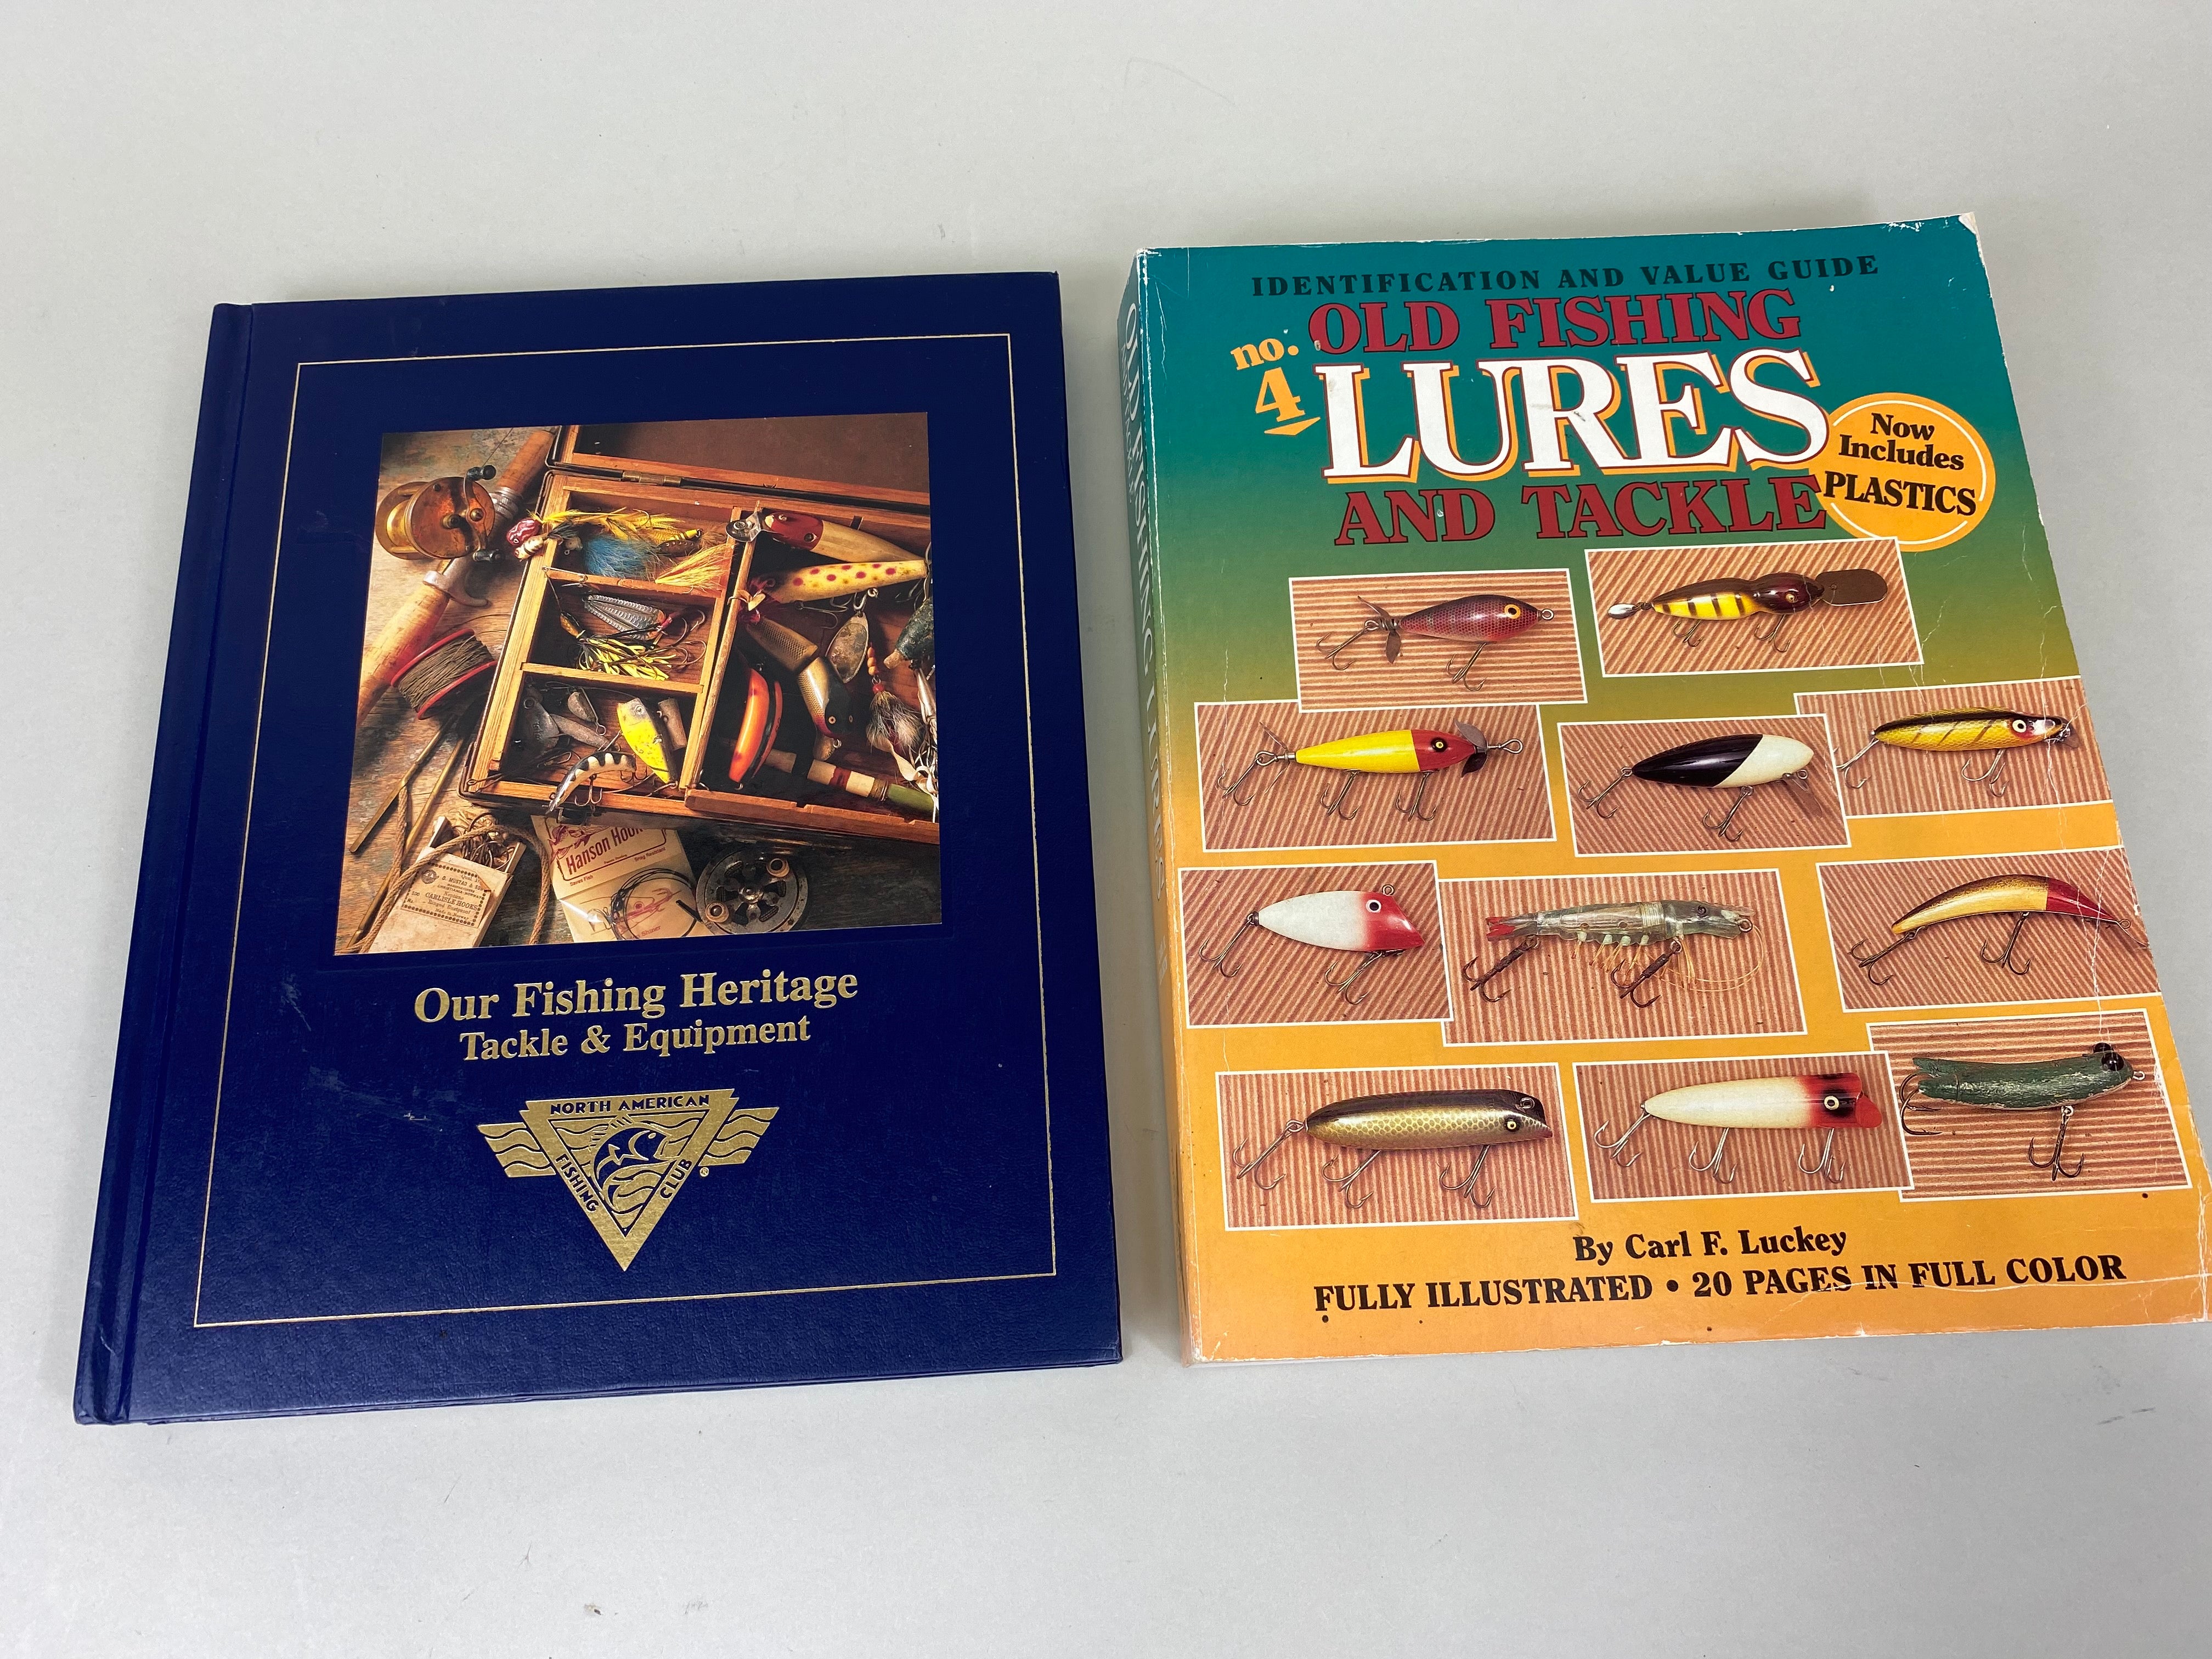 Two Books- Our Fishing Heritage: Tackle & Equipment, and Old